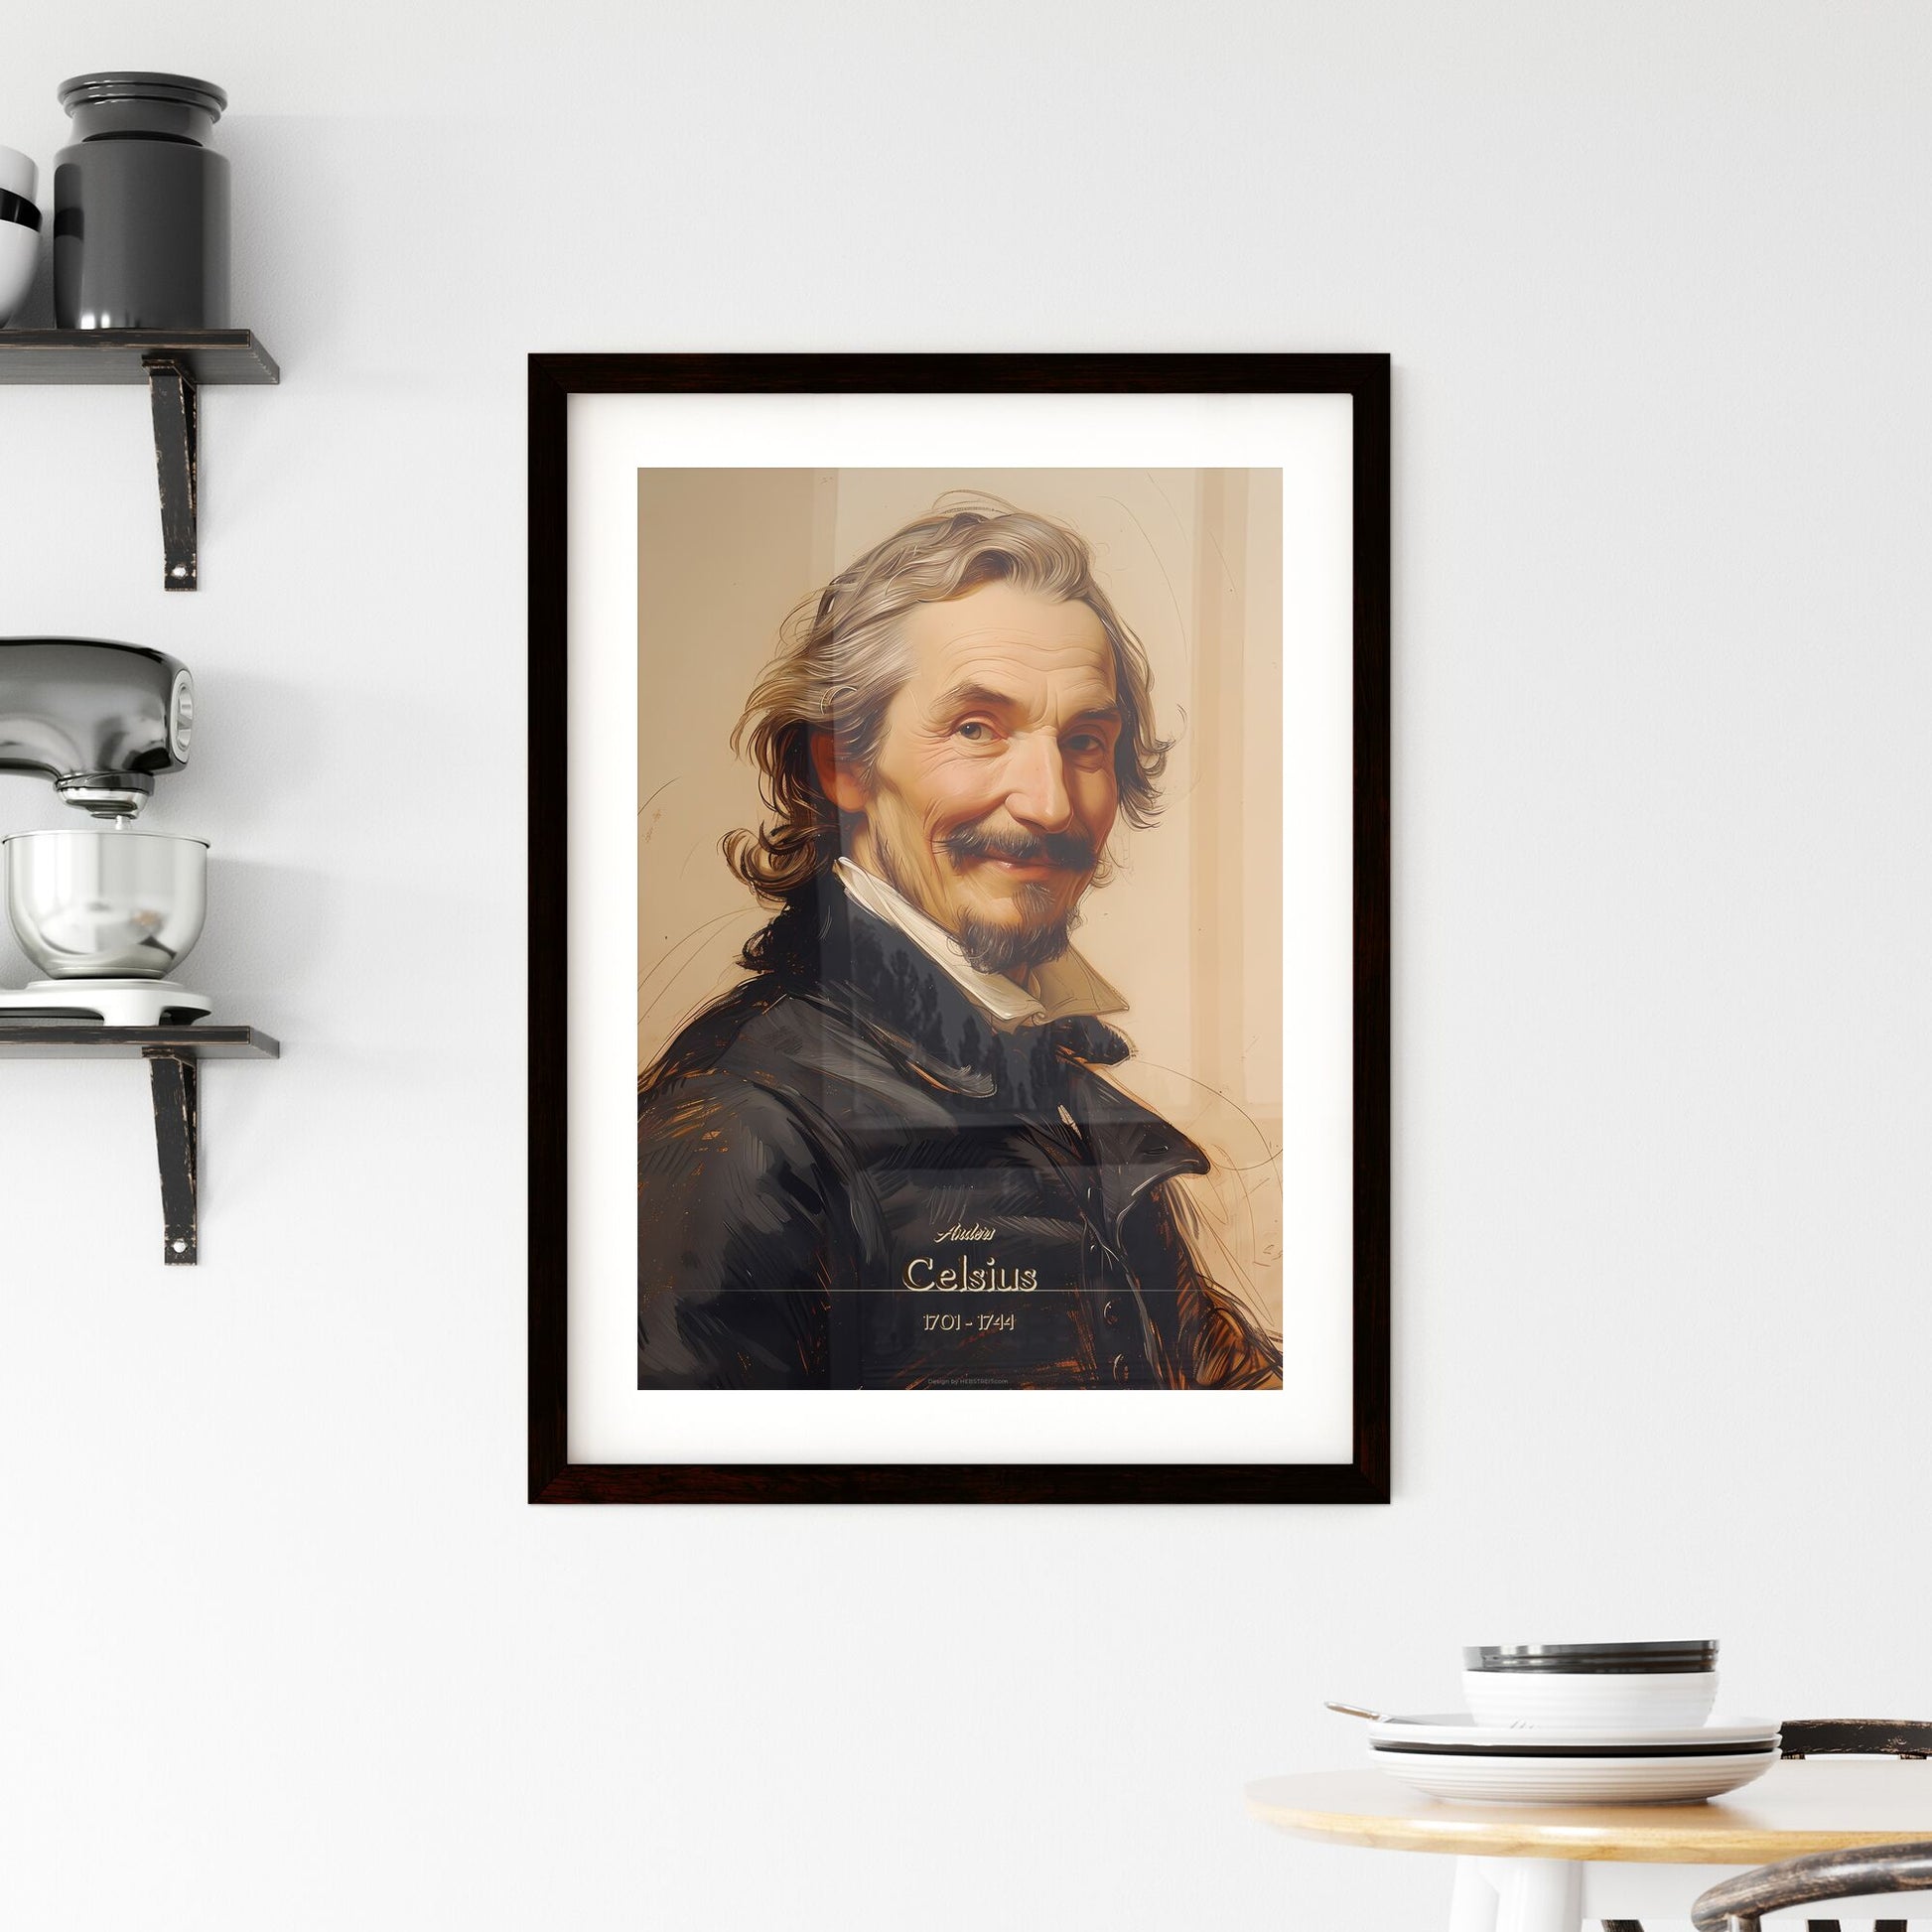 Anders, Celsius, 1701 - 1744, A Poster of a man with long hair and a mustache Default Title